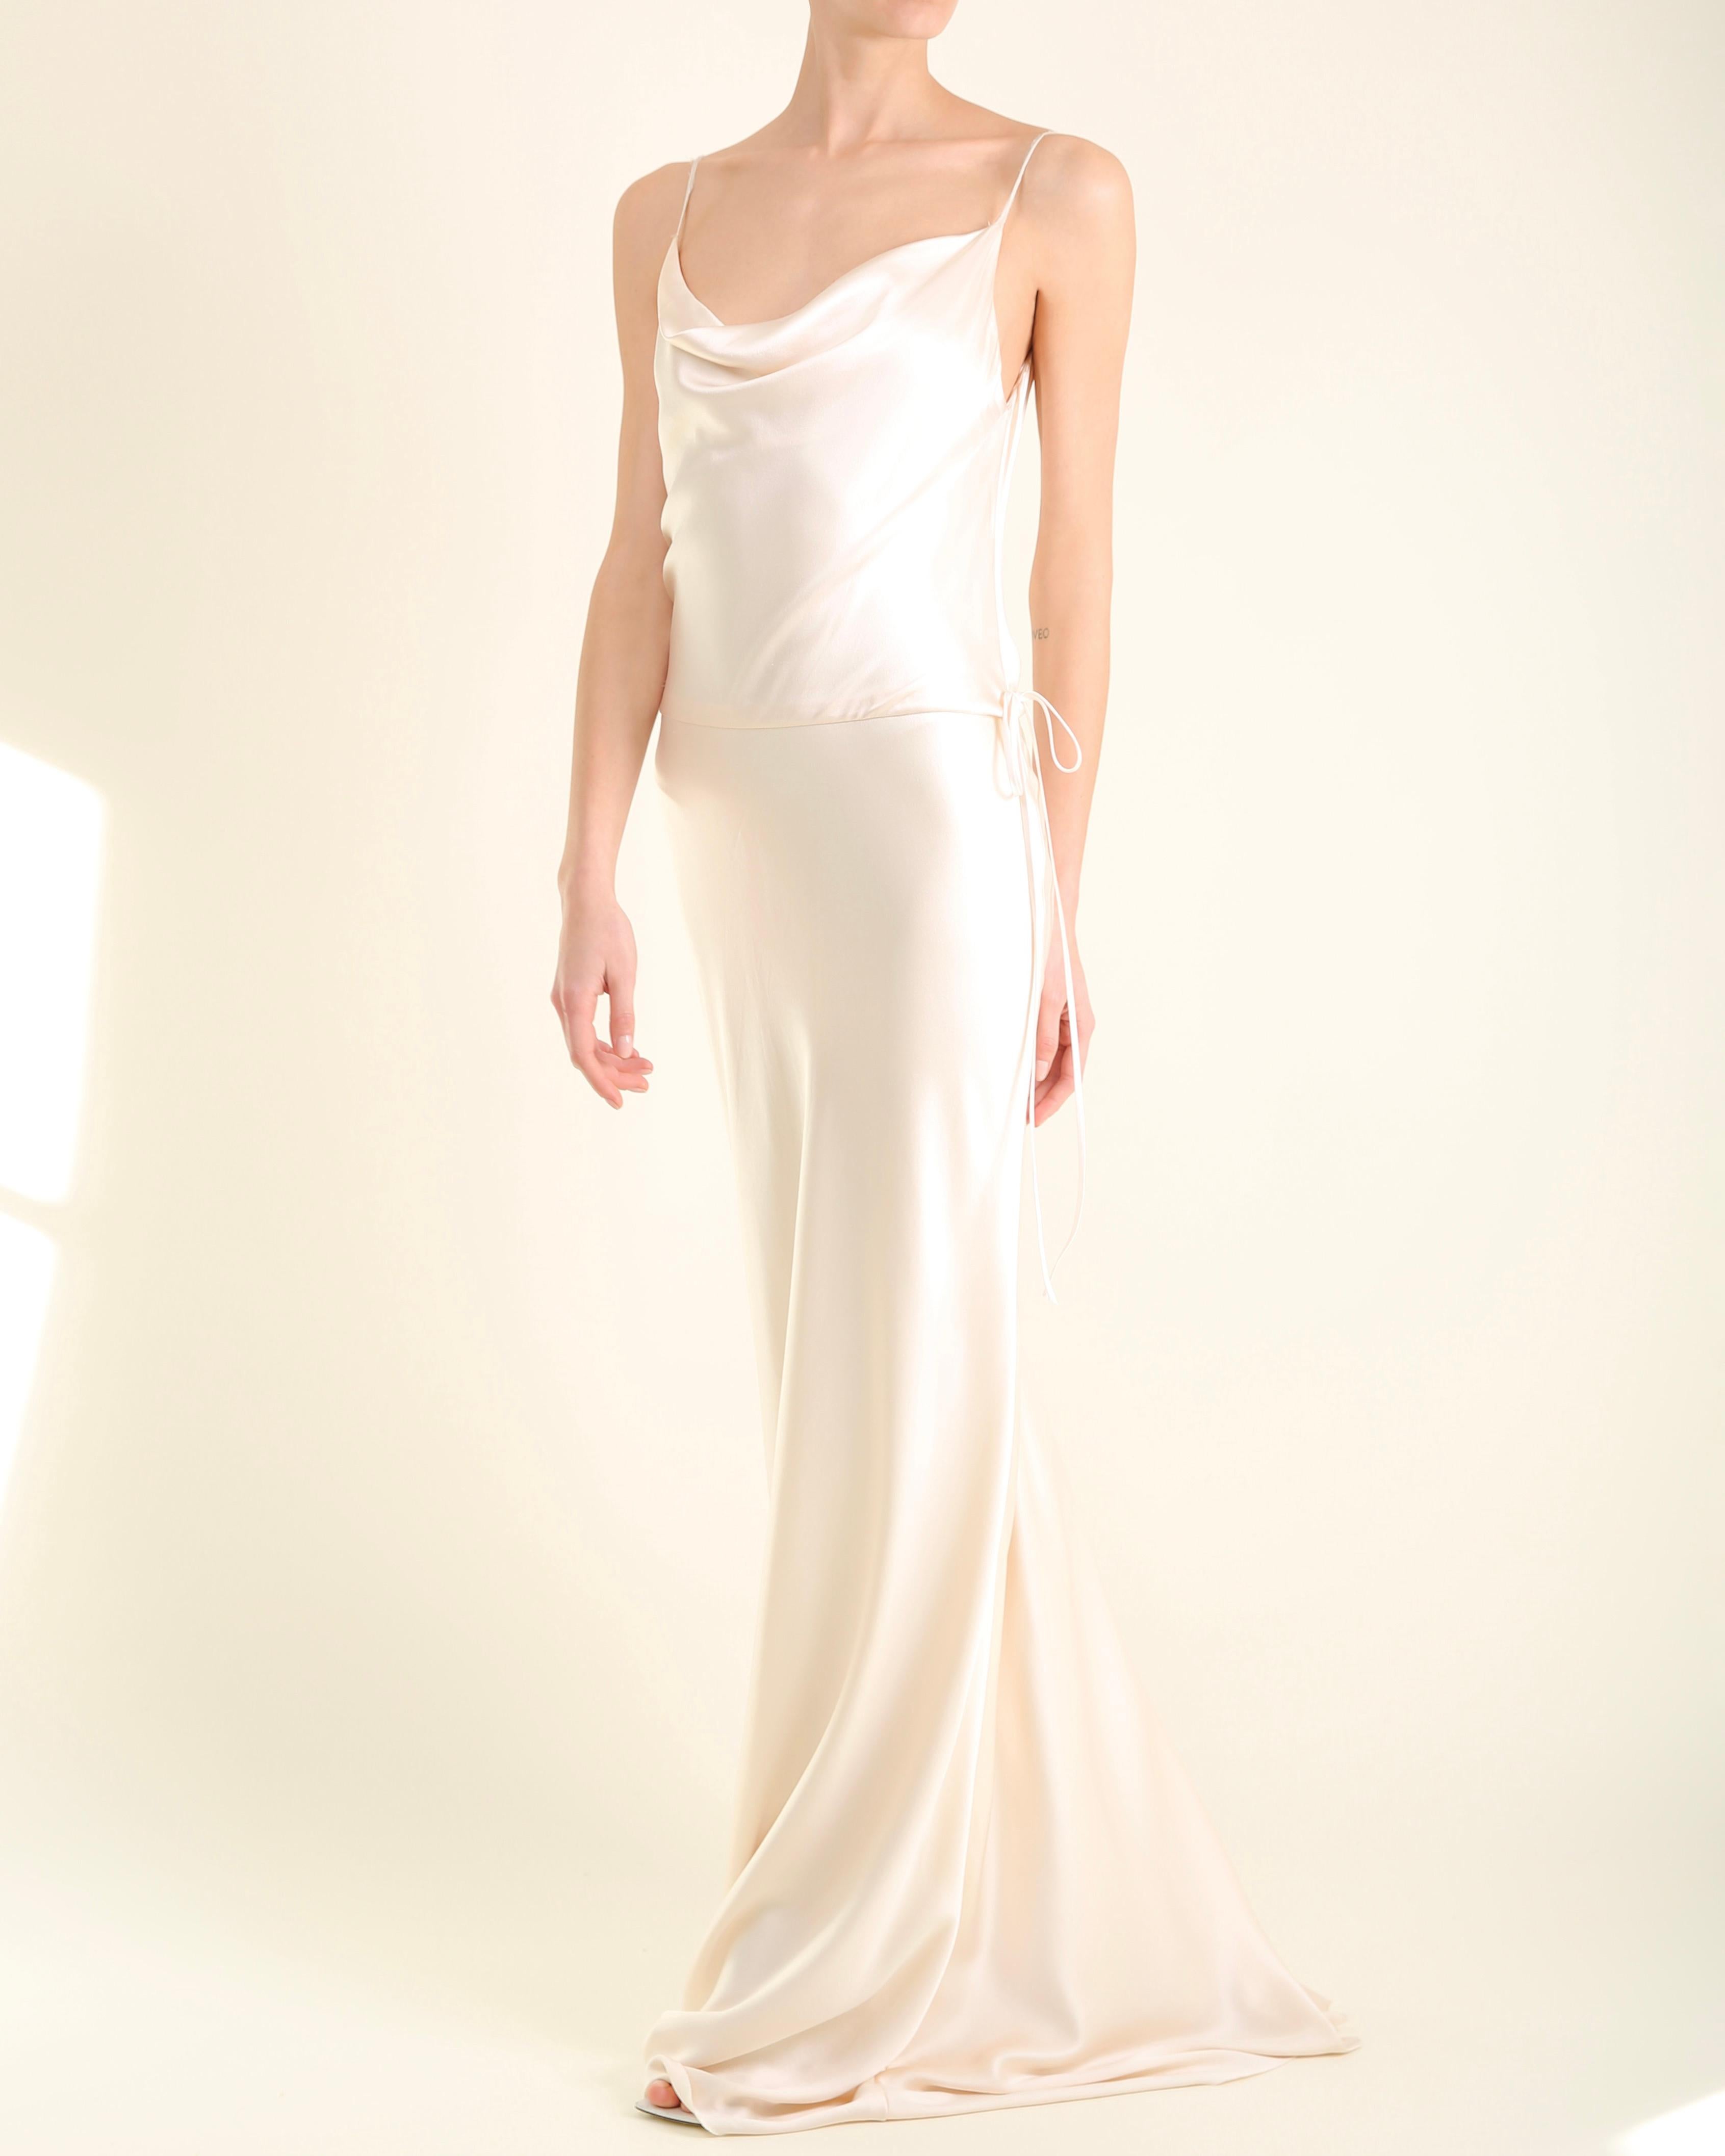 Monique L'huillier ivory silk draped wedding dress gown with low back and train For Sale 7